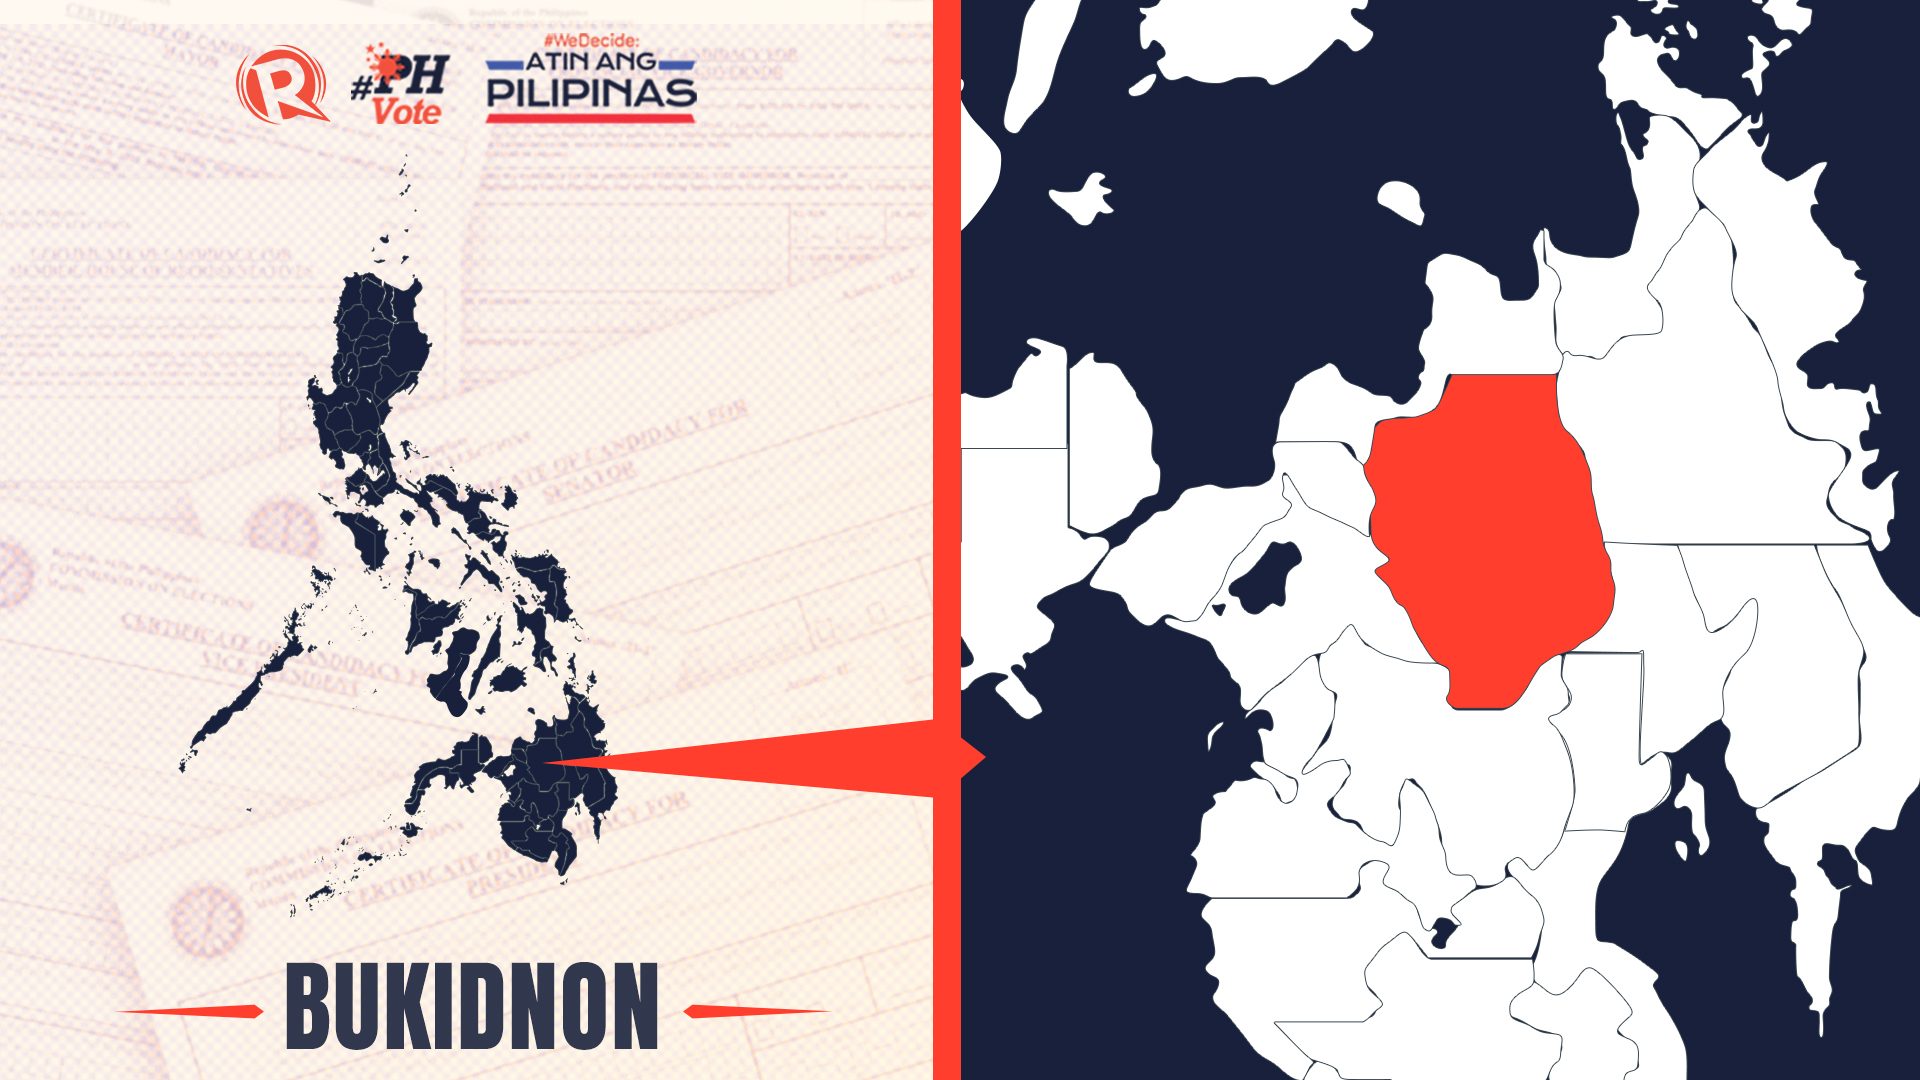 LIST: Who is running in Bukidnon in the 2022 Philippine elections?